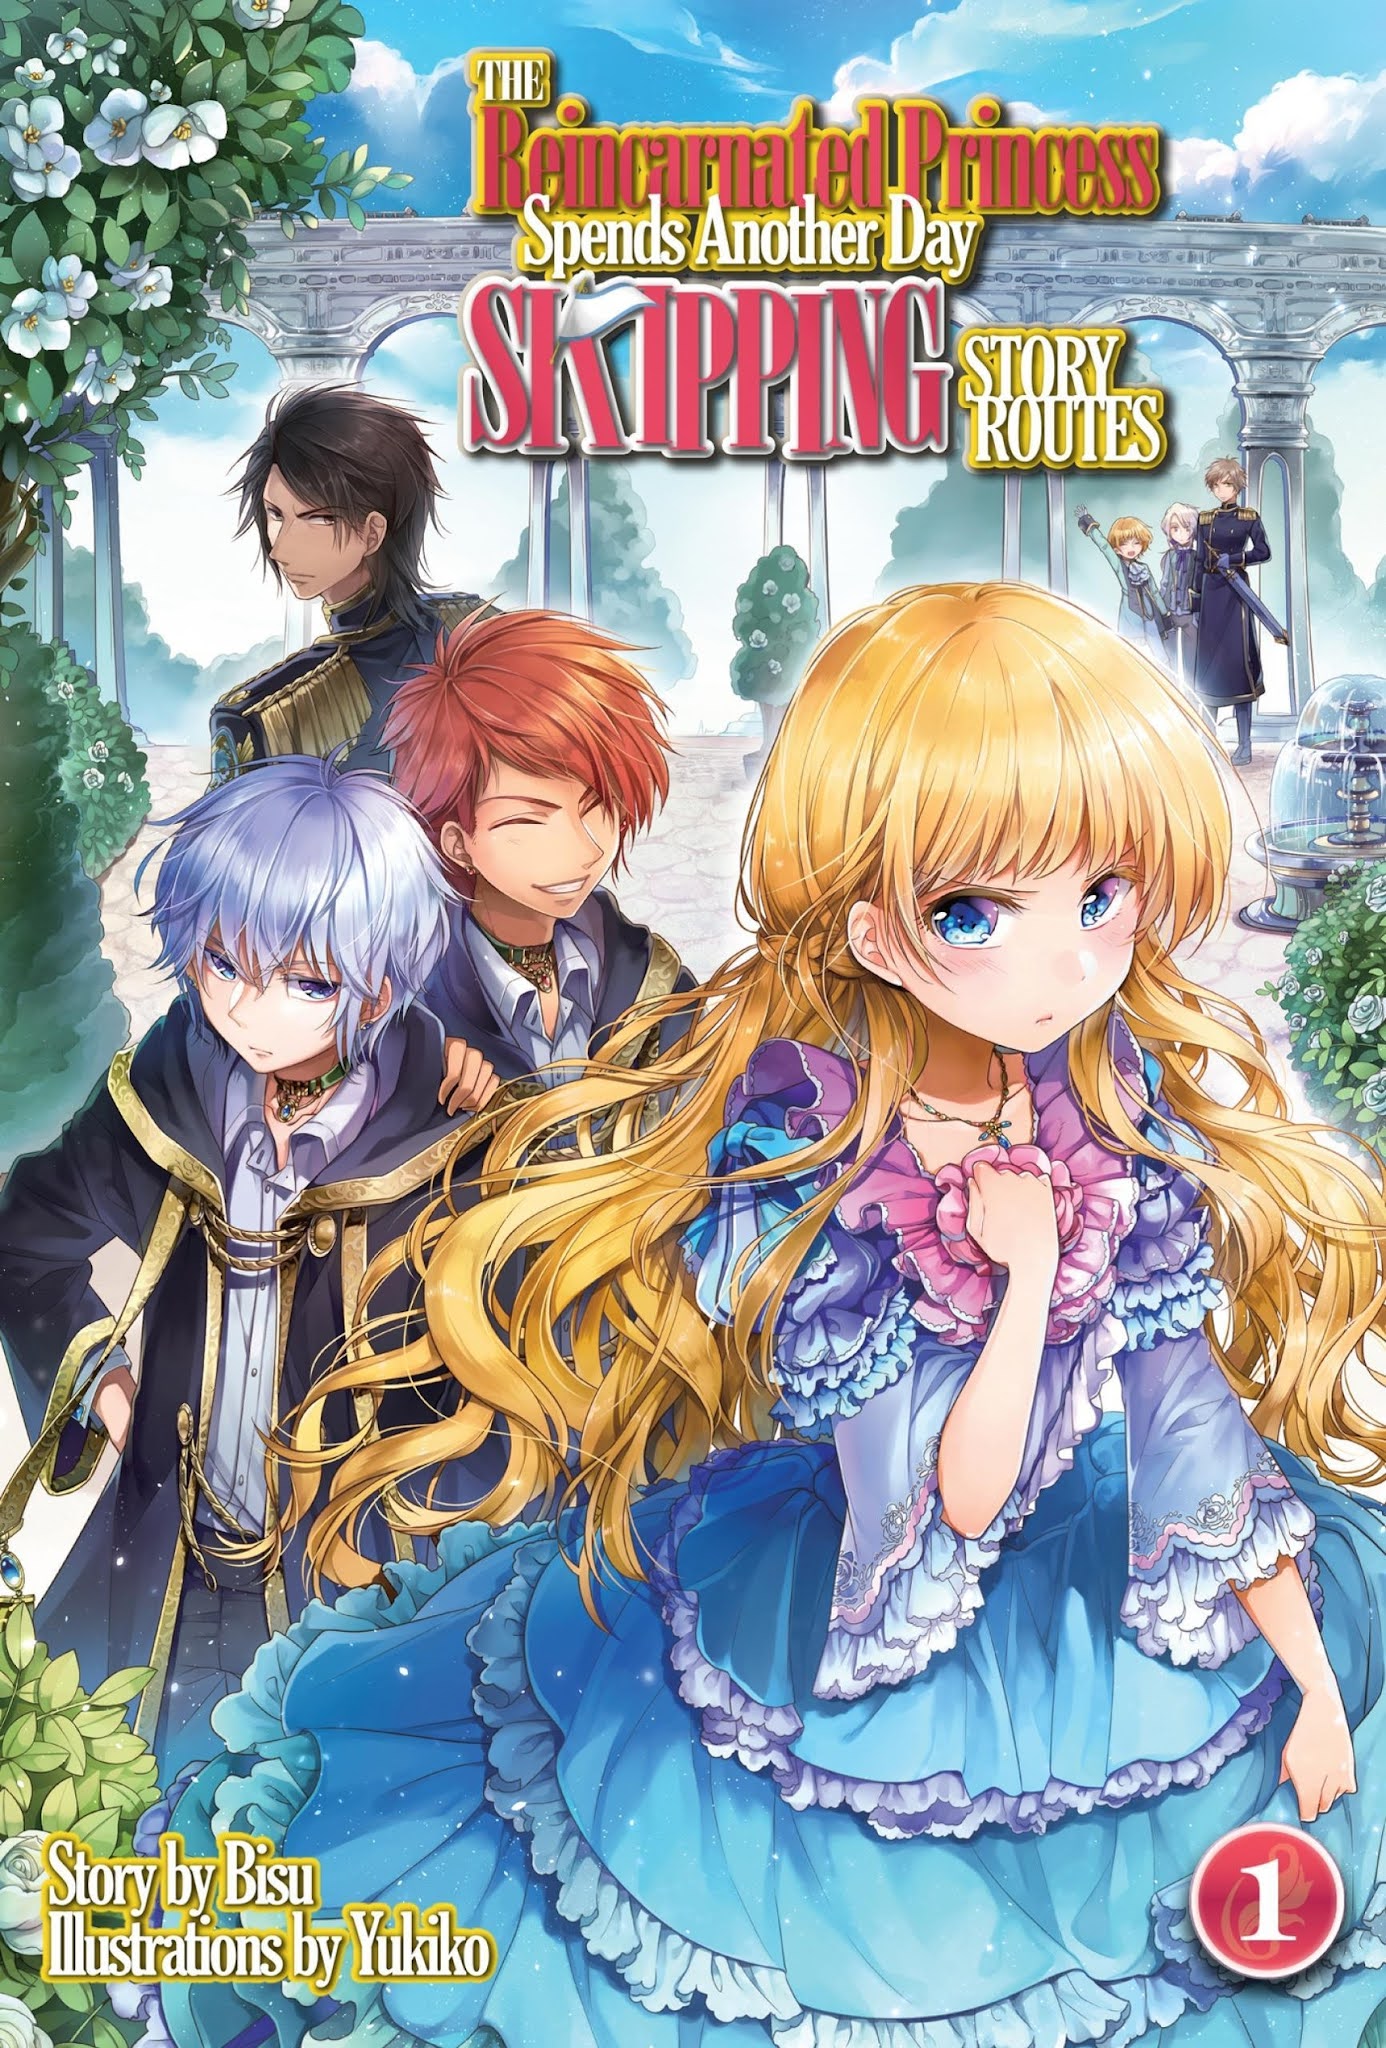 Light Novel Review: The Reincarnated Princess Spends Another Day Skipping  Story Routes: Volume 1~ favorite light novel for the year!